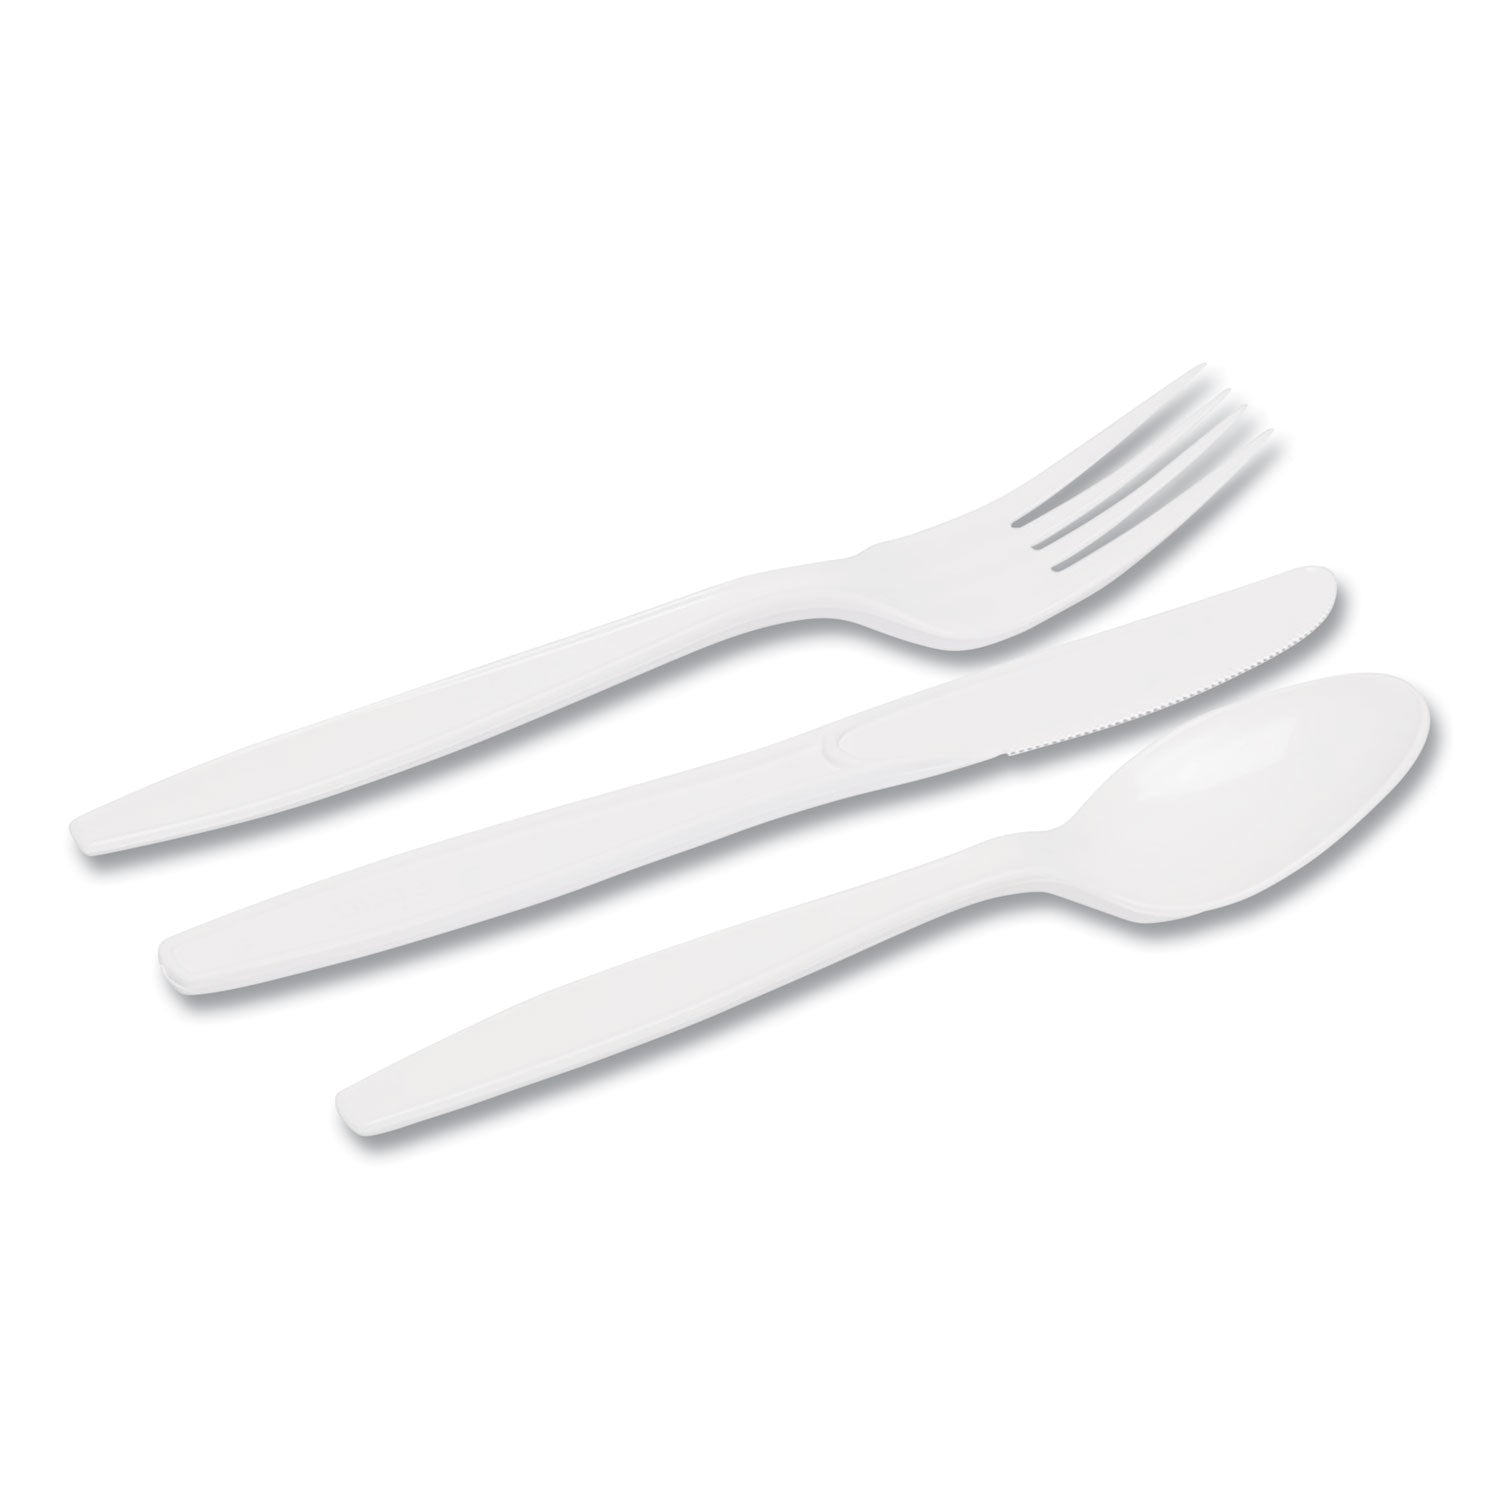 combo-pack-tray-with-white-plastic-utensils-56-forks-56-knives-56-spoons-6-packs_dxecm168ct - 2